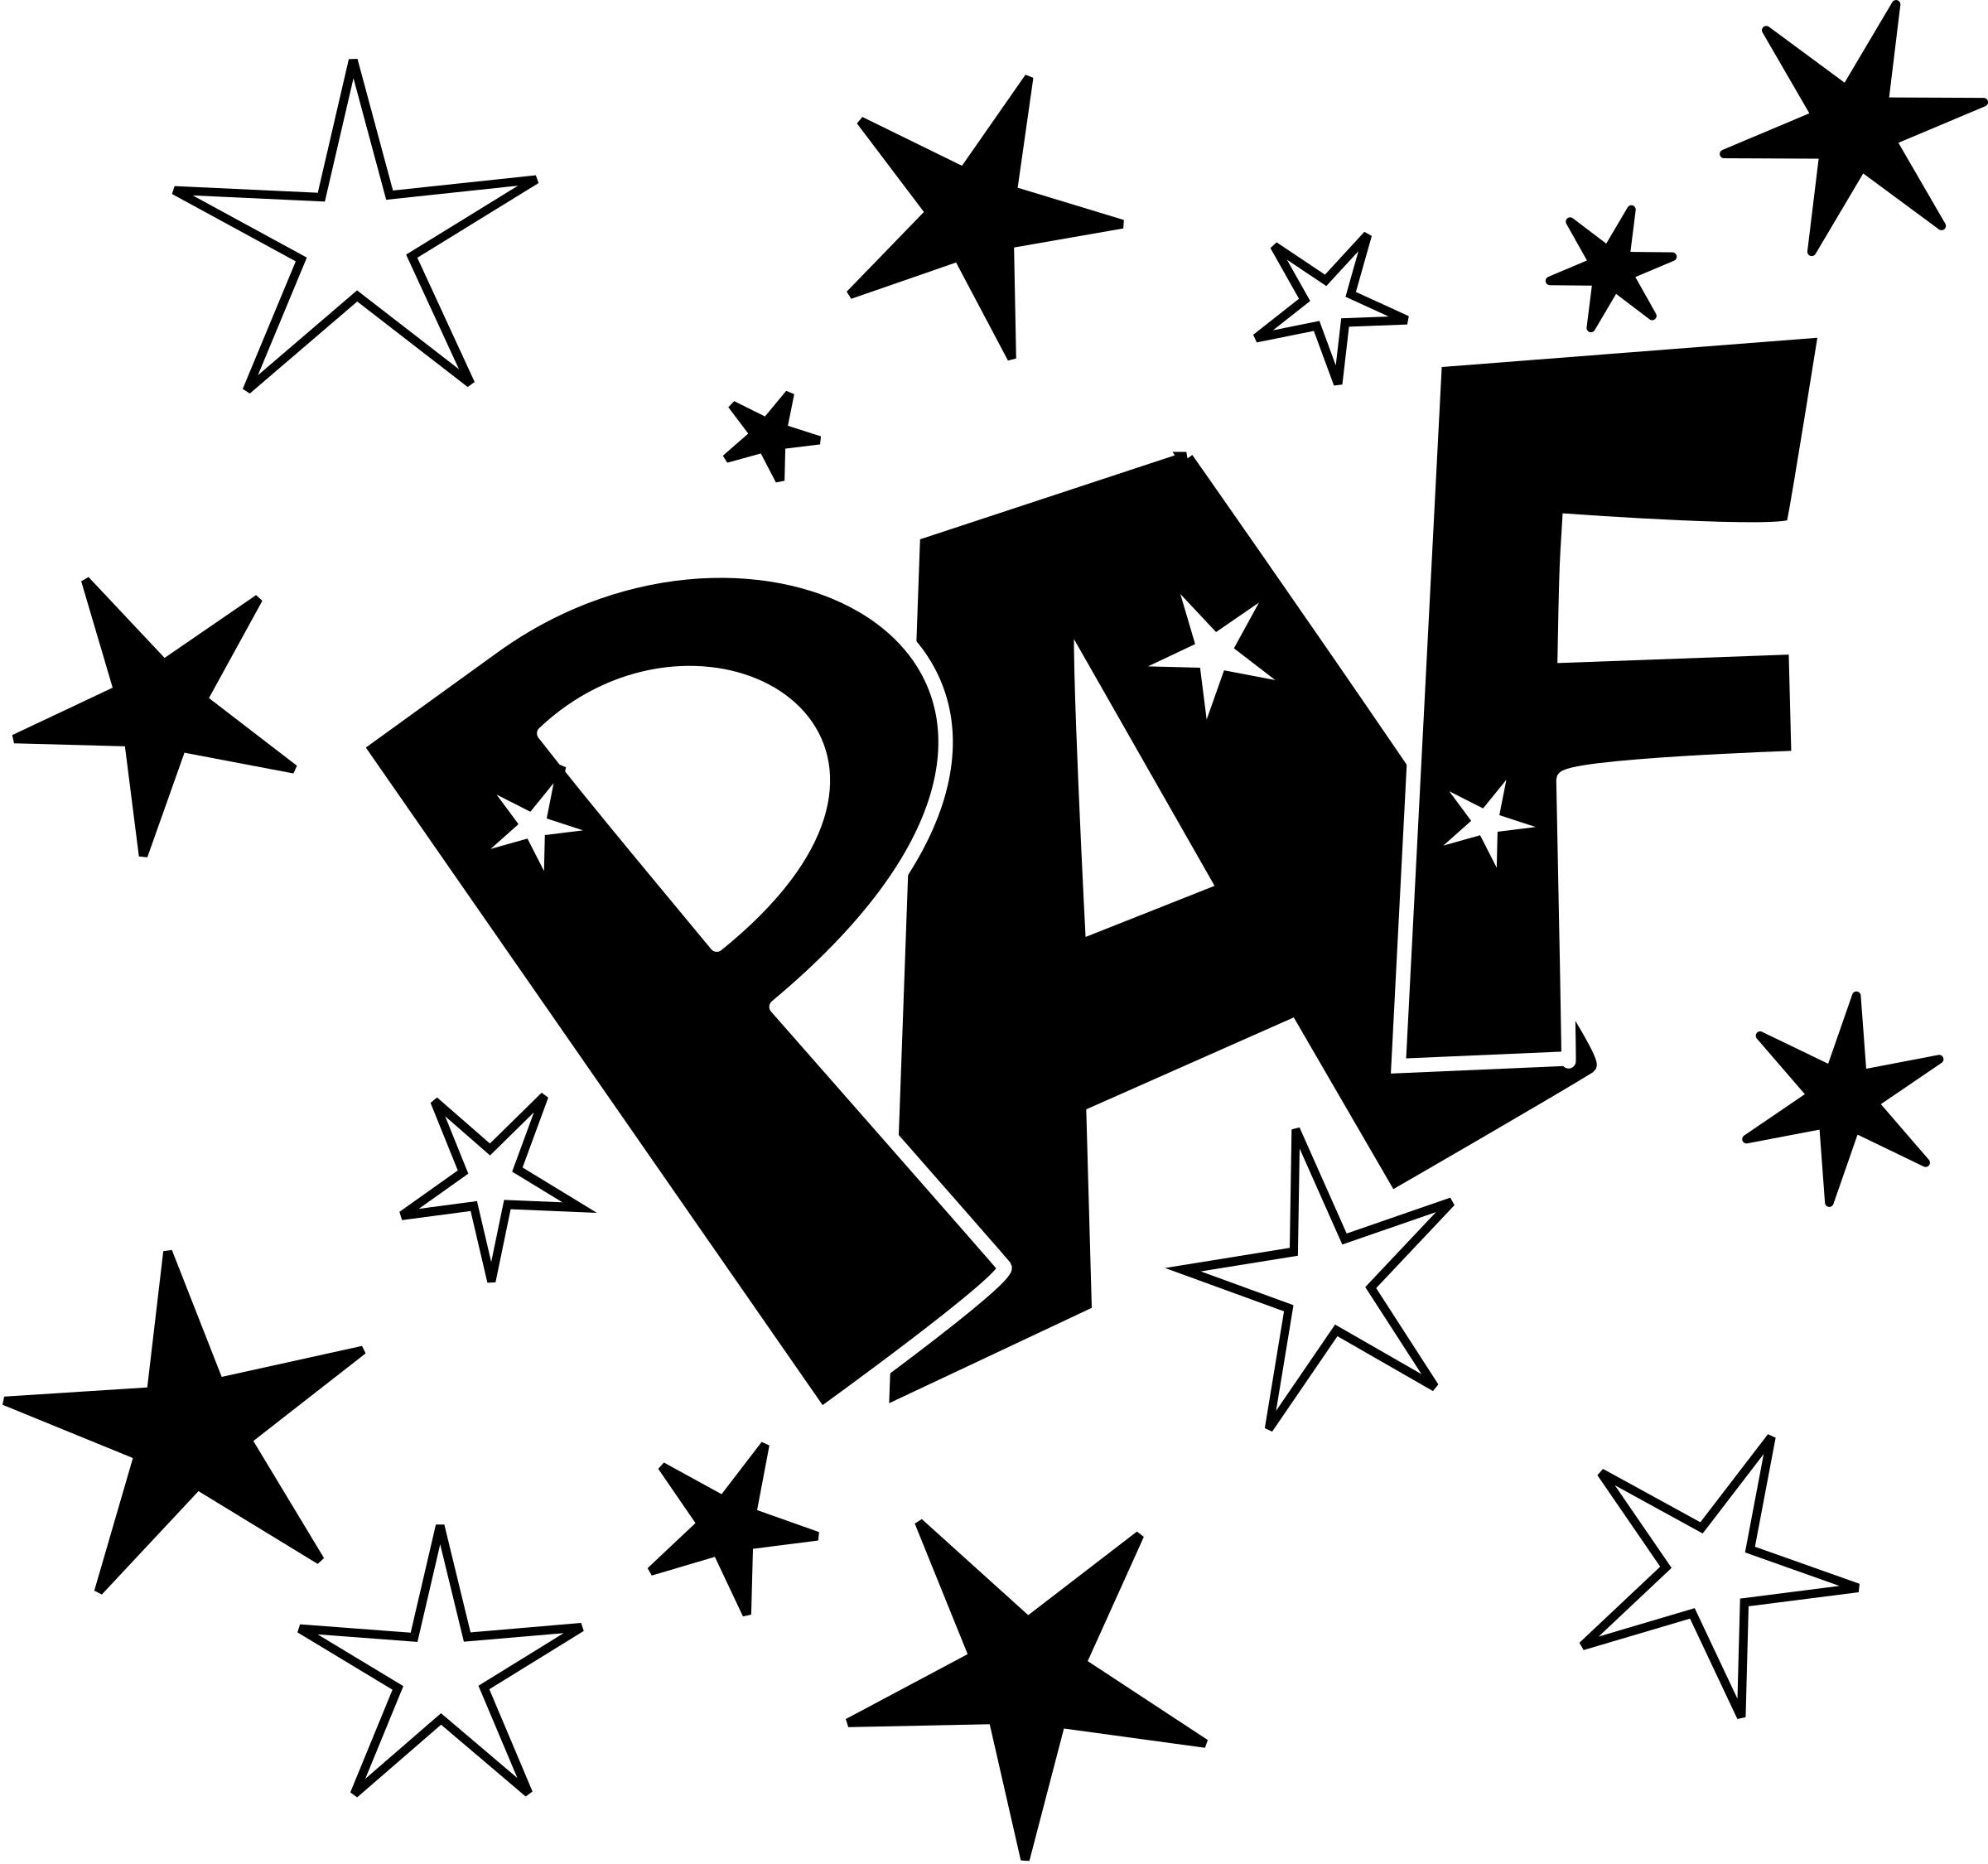 PAF in black and white png